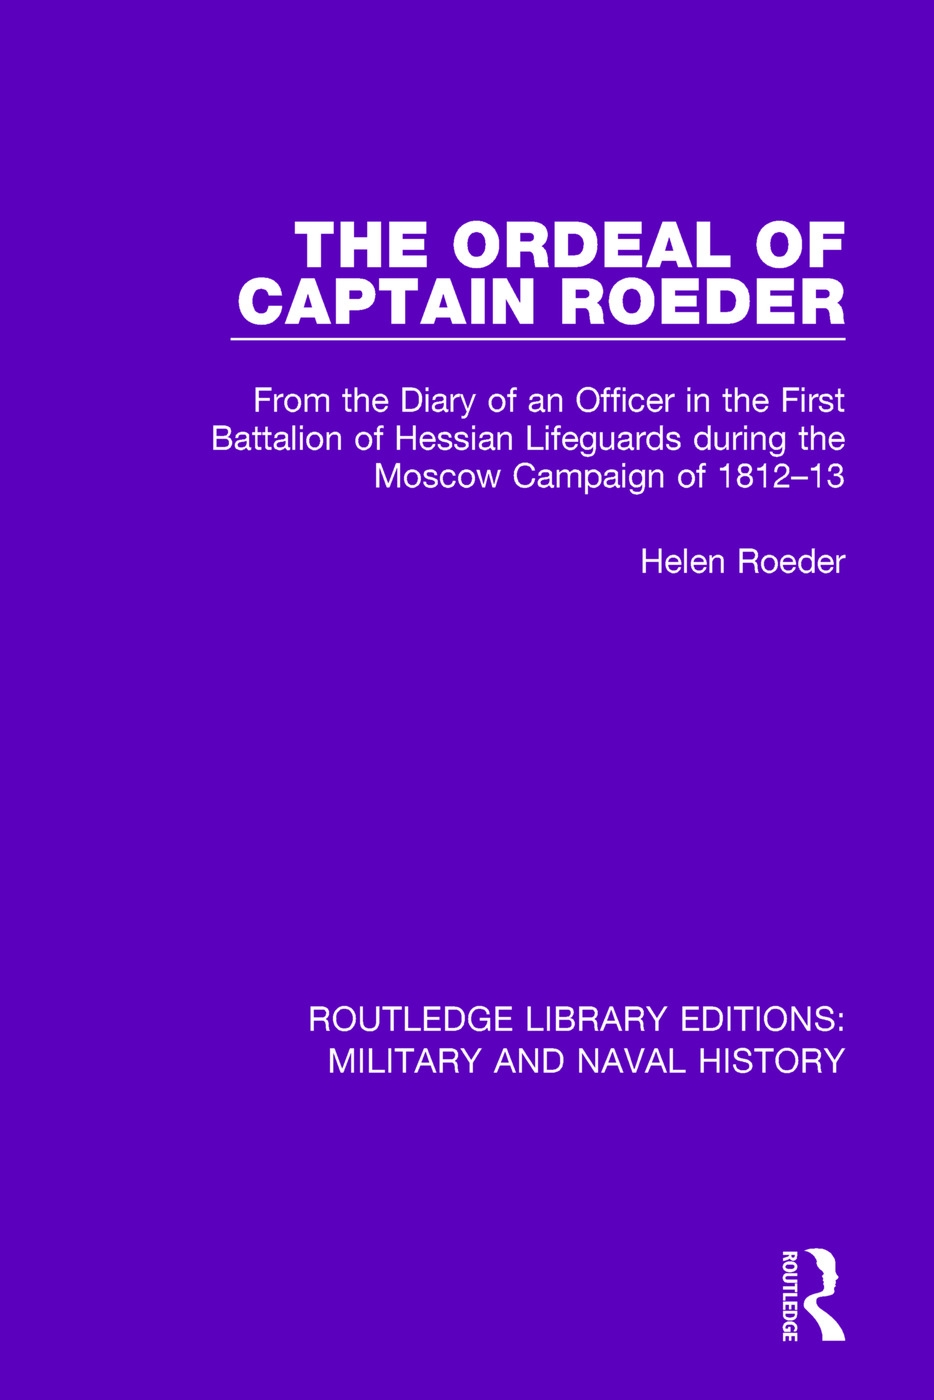 The Ordeal of Captain Roeder: From the Diary of an Officer in the First Battalion of Hessian Lifeguards During the Moscow Campaign of 1812-13